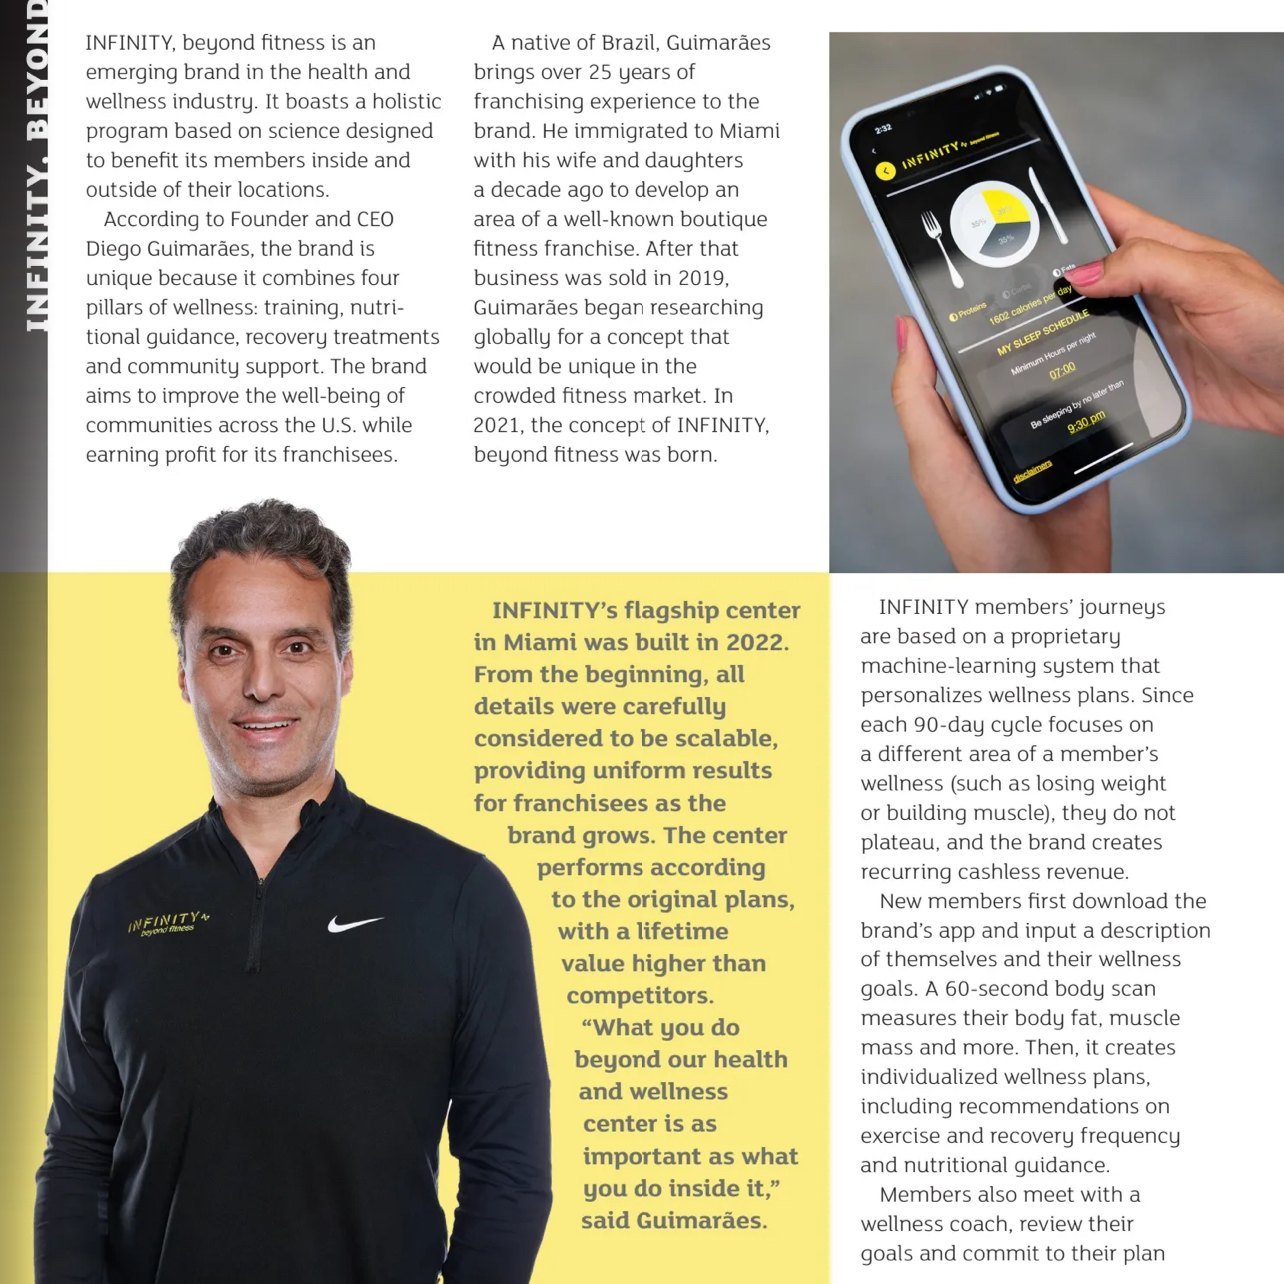 Thank you @franchisedictionarymagazine for this feature! We are thrilled to share our origin story, concept and vision to build a healthier planet for us all 🌎

 #FranchisingOpportunity #beyondfitness #entrepreneurlife #startuplife #floridaliving #w